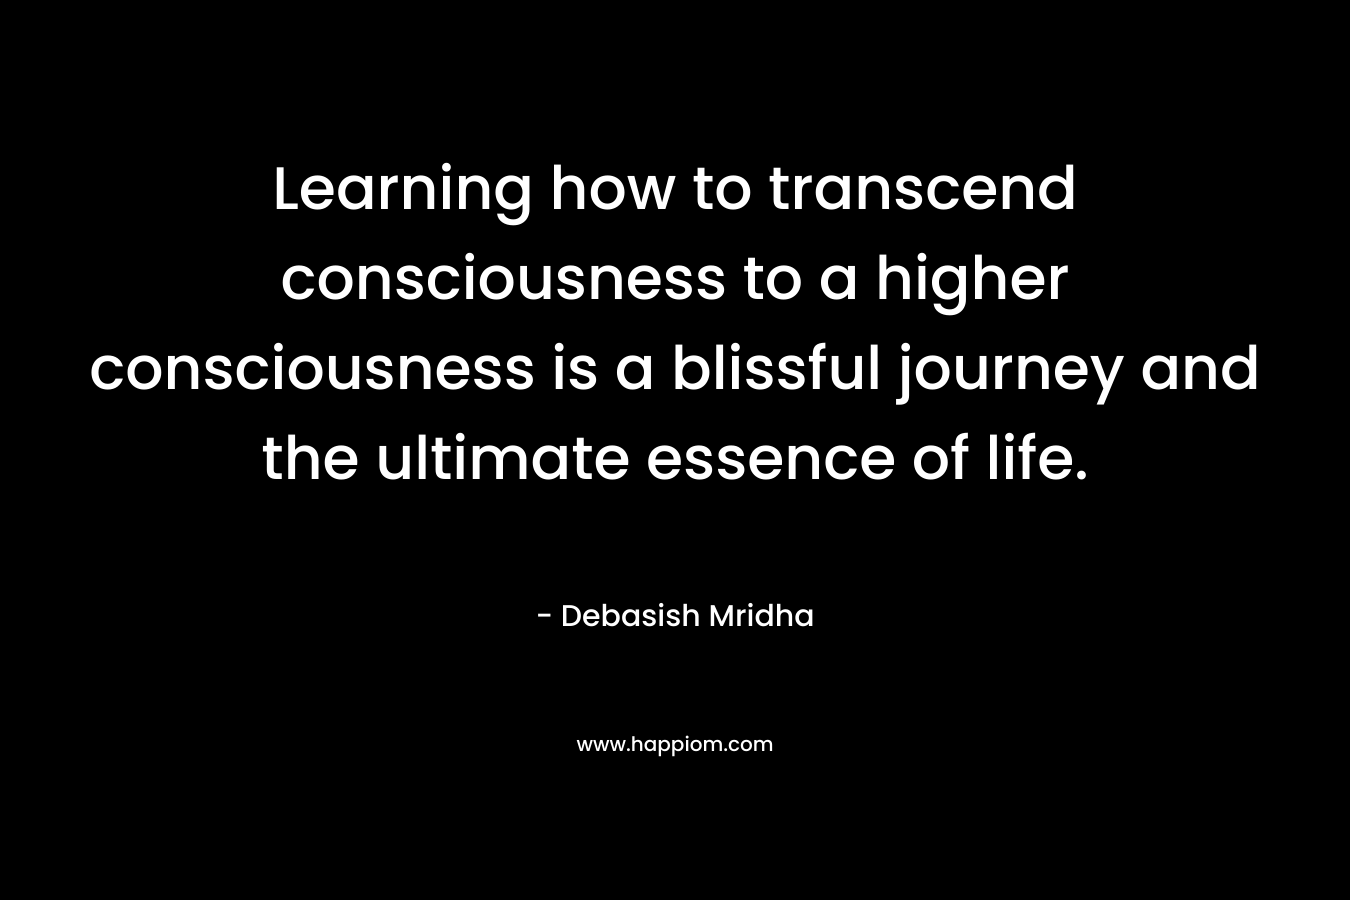 Learning how to transcend consciousness to a higher consciousness is a blissful journey and the ultimate essence of life.